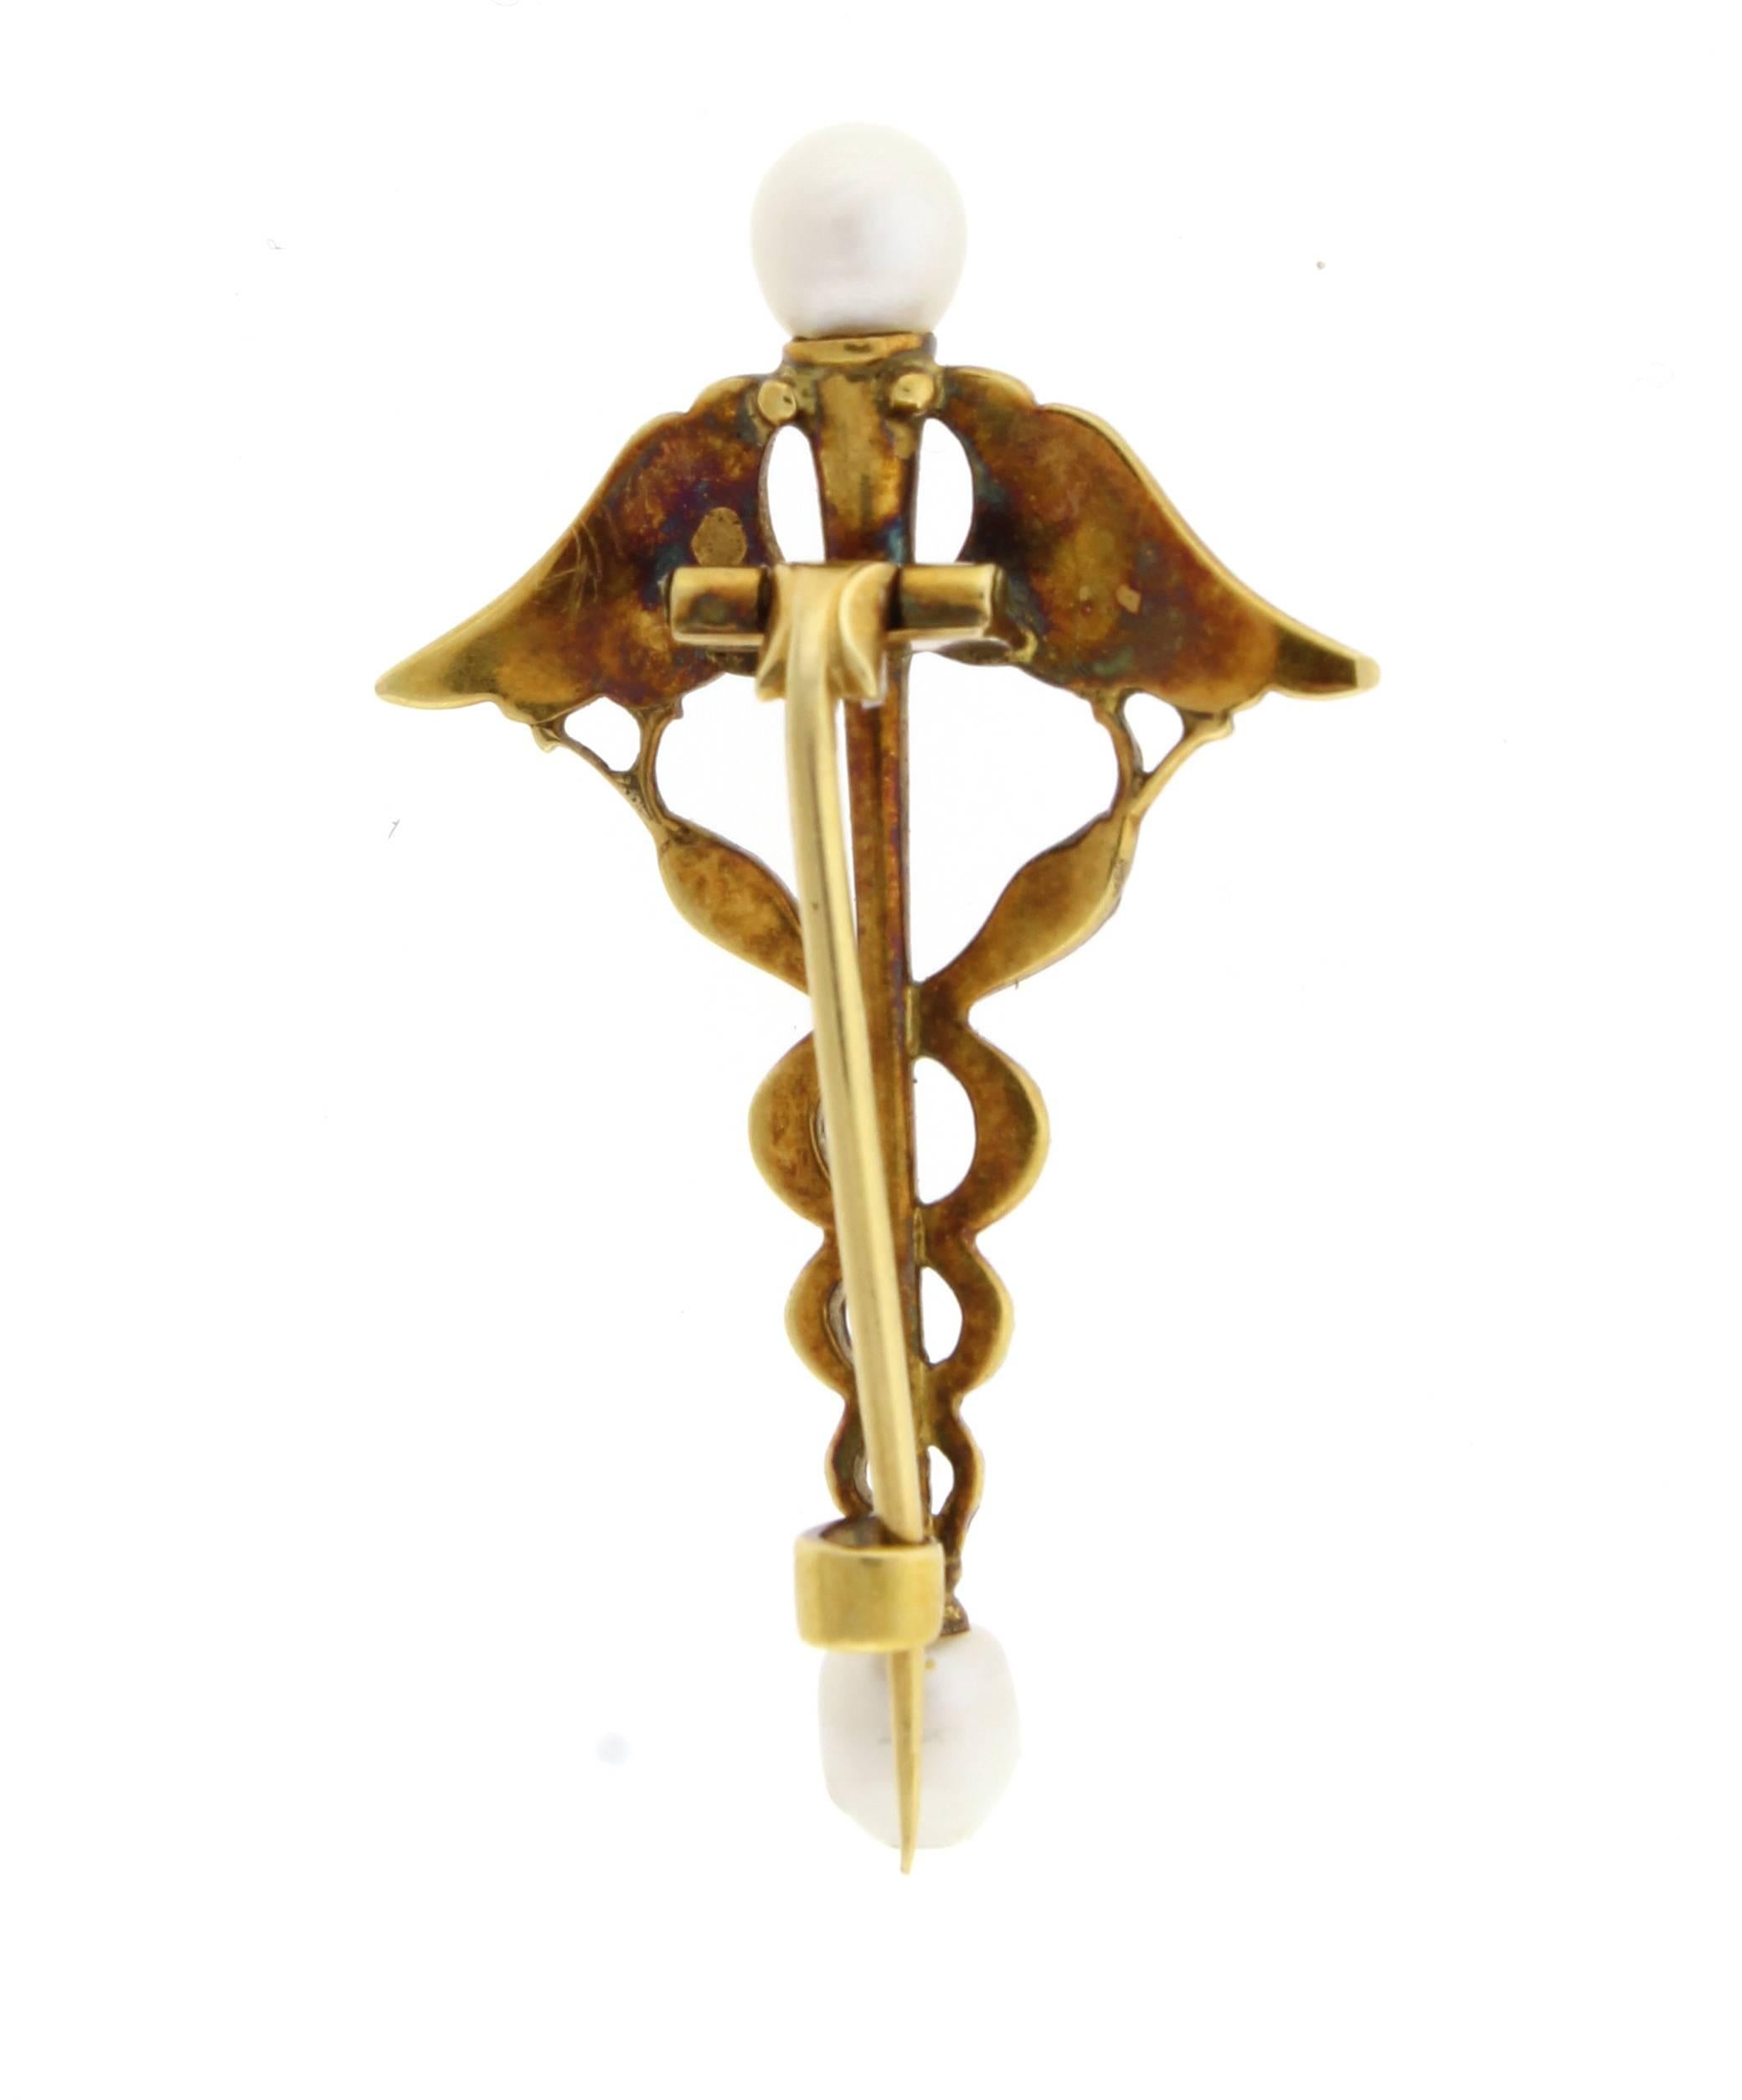 From master jewelers Carlo and Arthur Giuliano, an caduceus brooch. The 18 karat brooch is comprised of a center scepter with intertwined serpents terminated with natural pearls.  The brooch is beautifully enameled and in original condition.
1 1/2